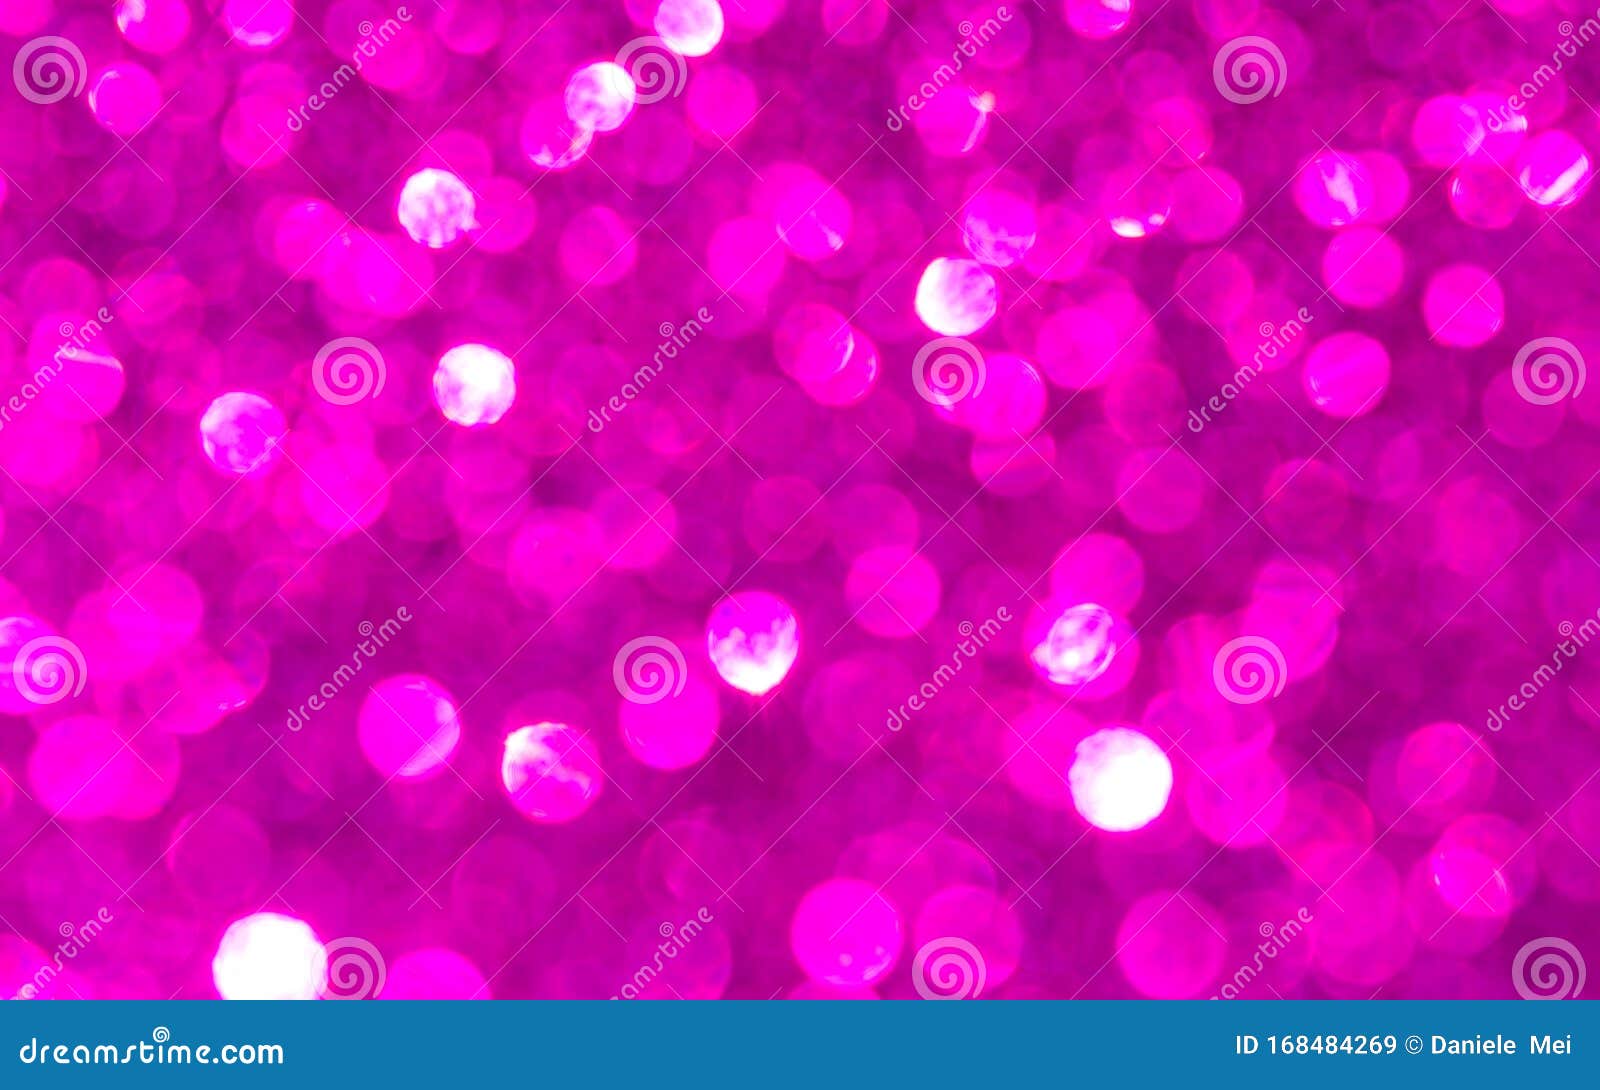 Purple Texture Colorful Blurred Abstract Background Stock Image - Image ...